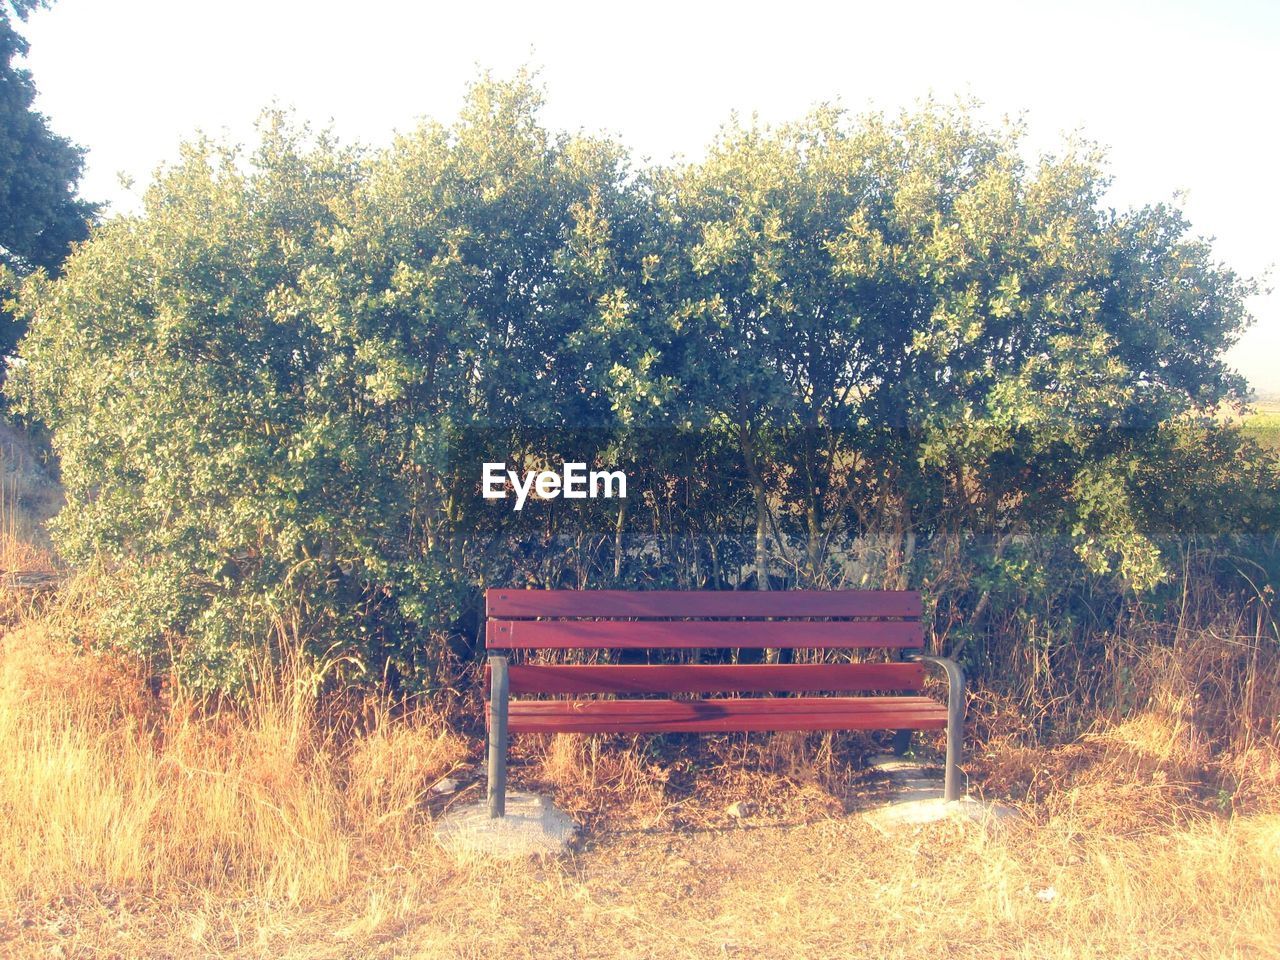 View of empty bench against plants